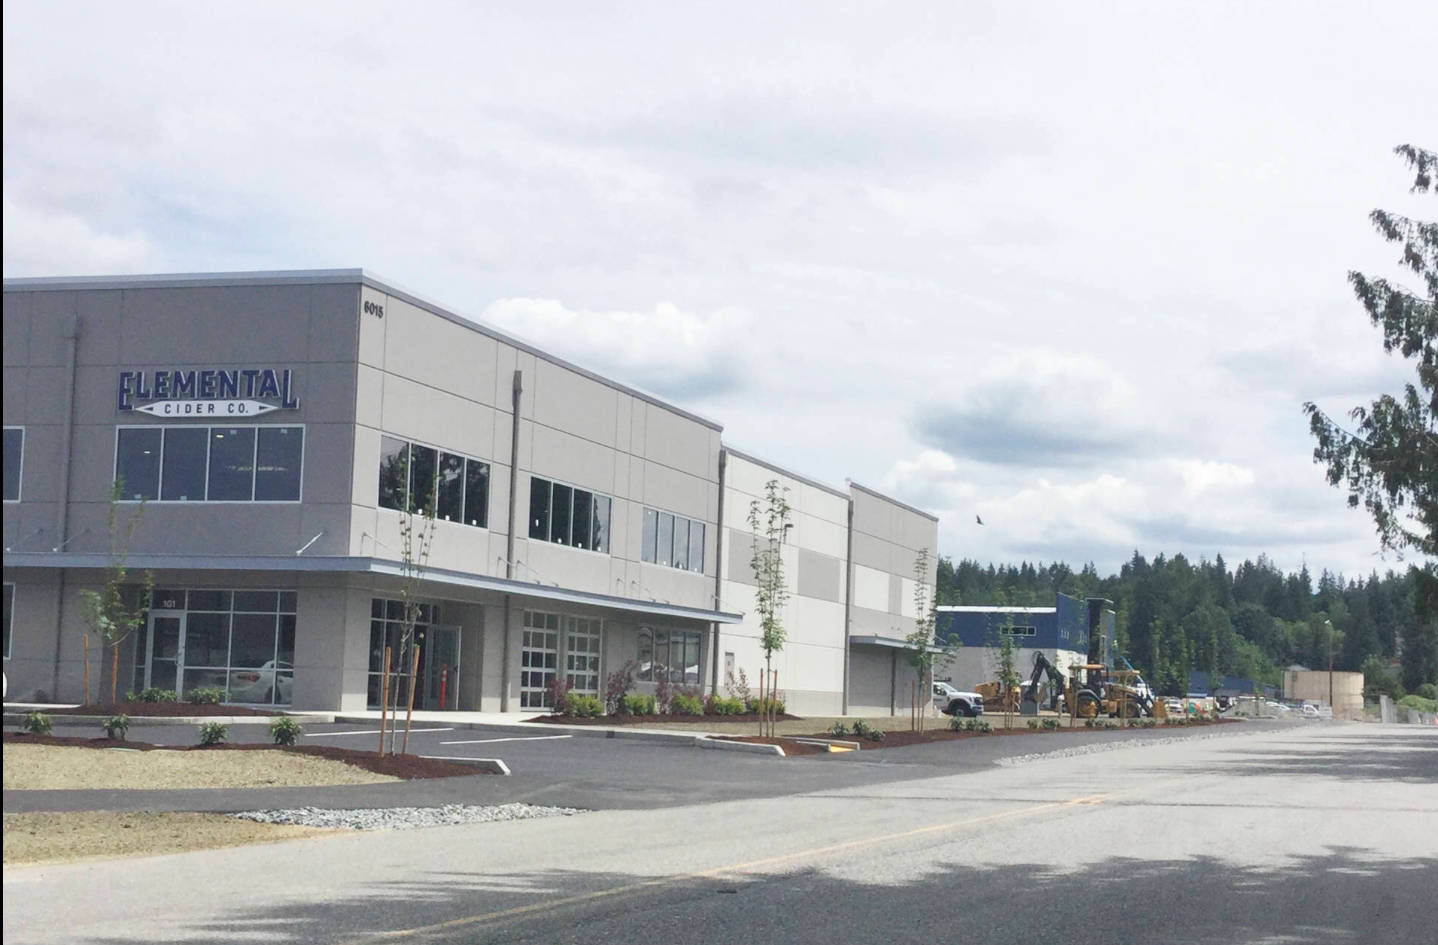 Elemental Cider Co. located in the SMARTCAP complex east of Arlington Airport is one of several new businesses and manufacturers opening or coming soon in the massive Cascade Industrial Center.